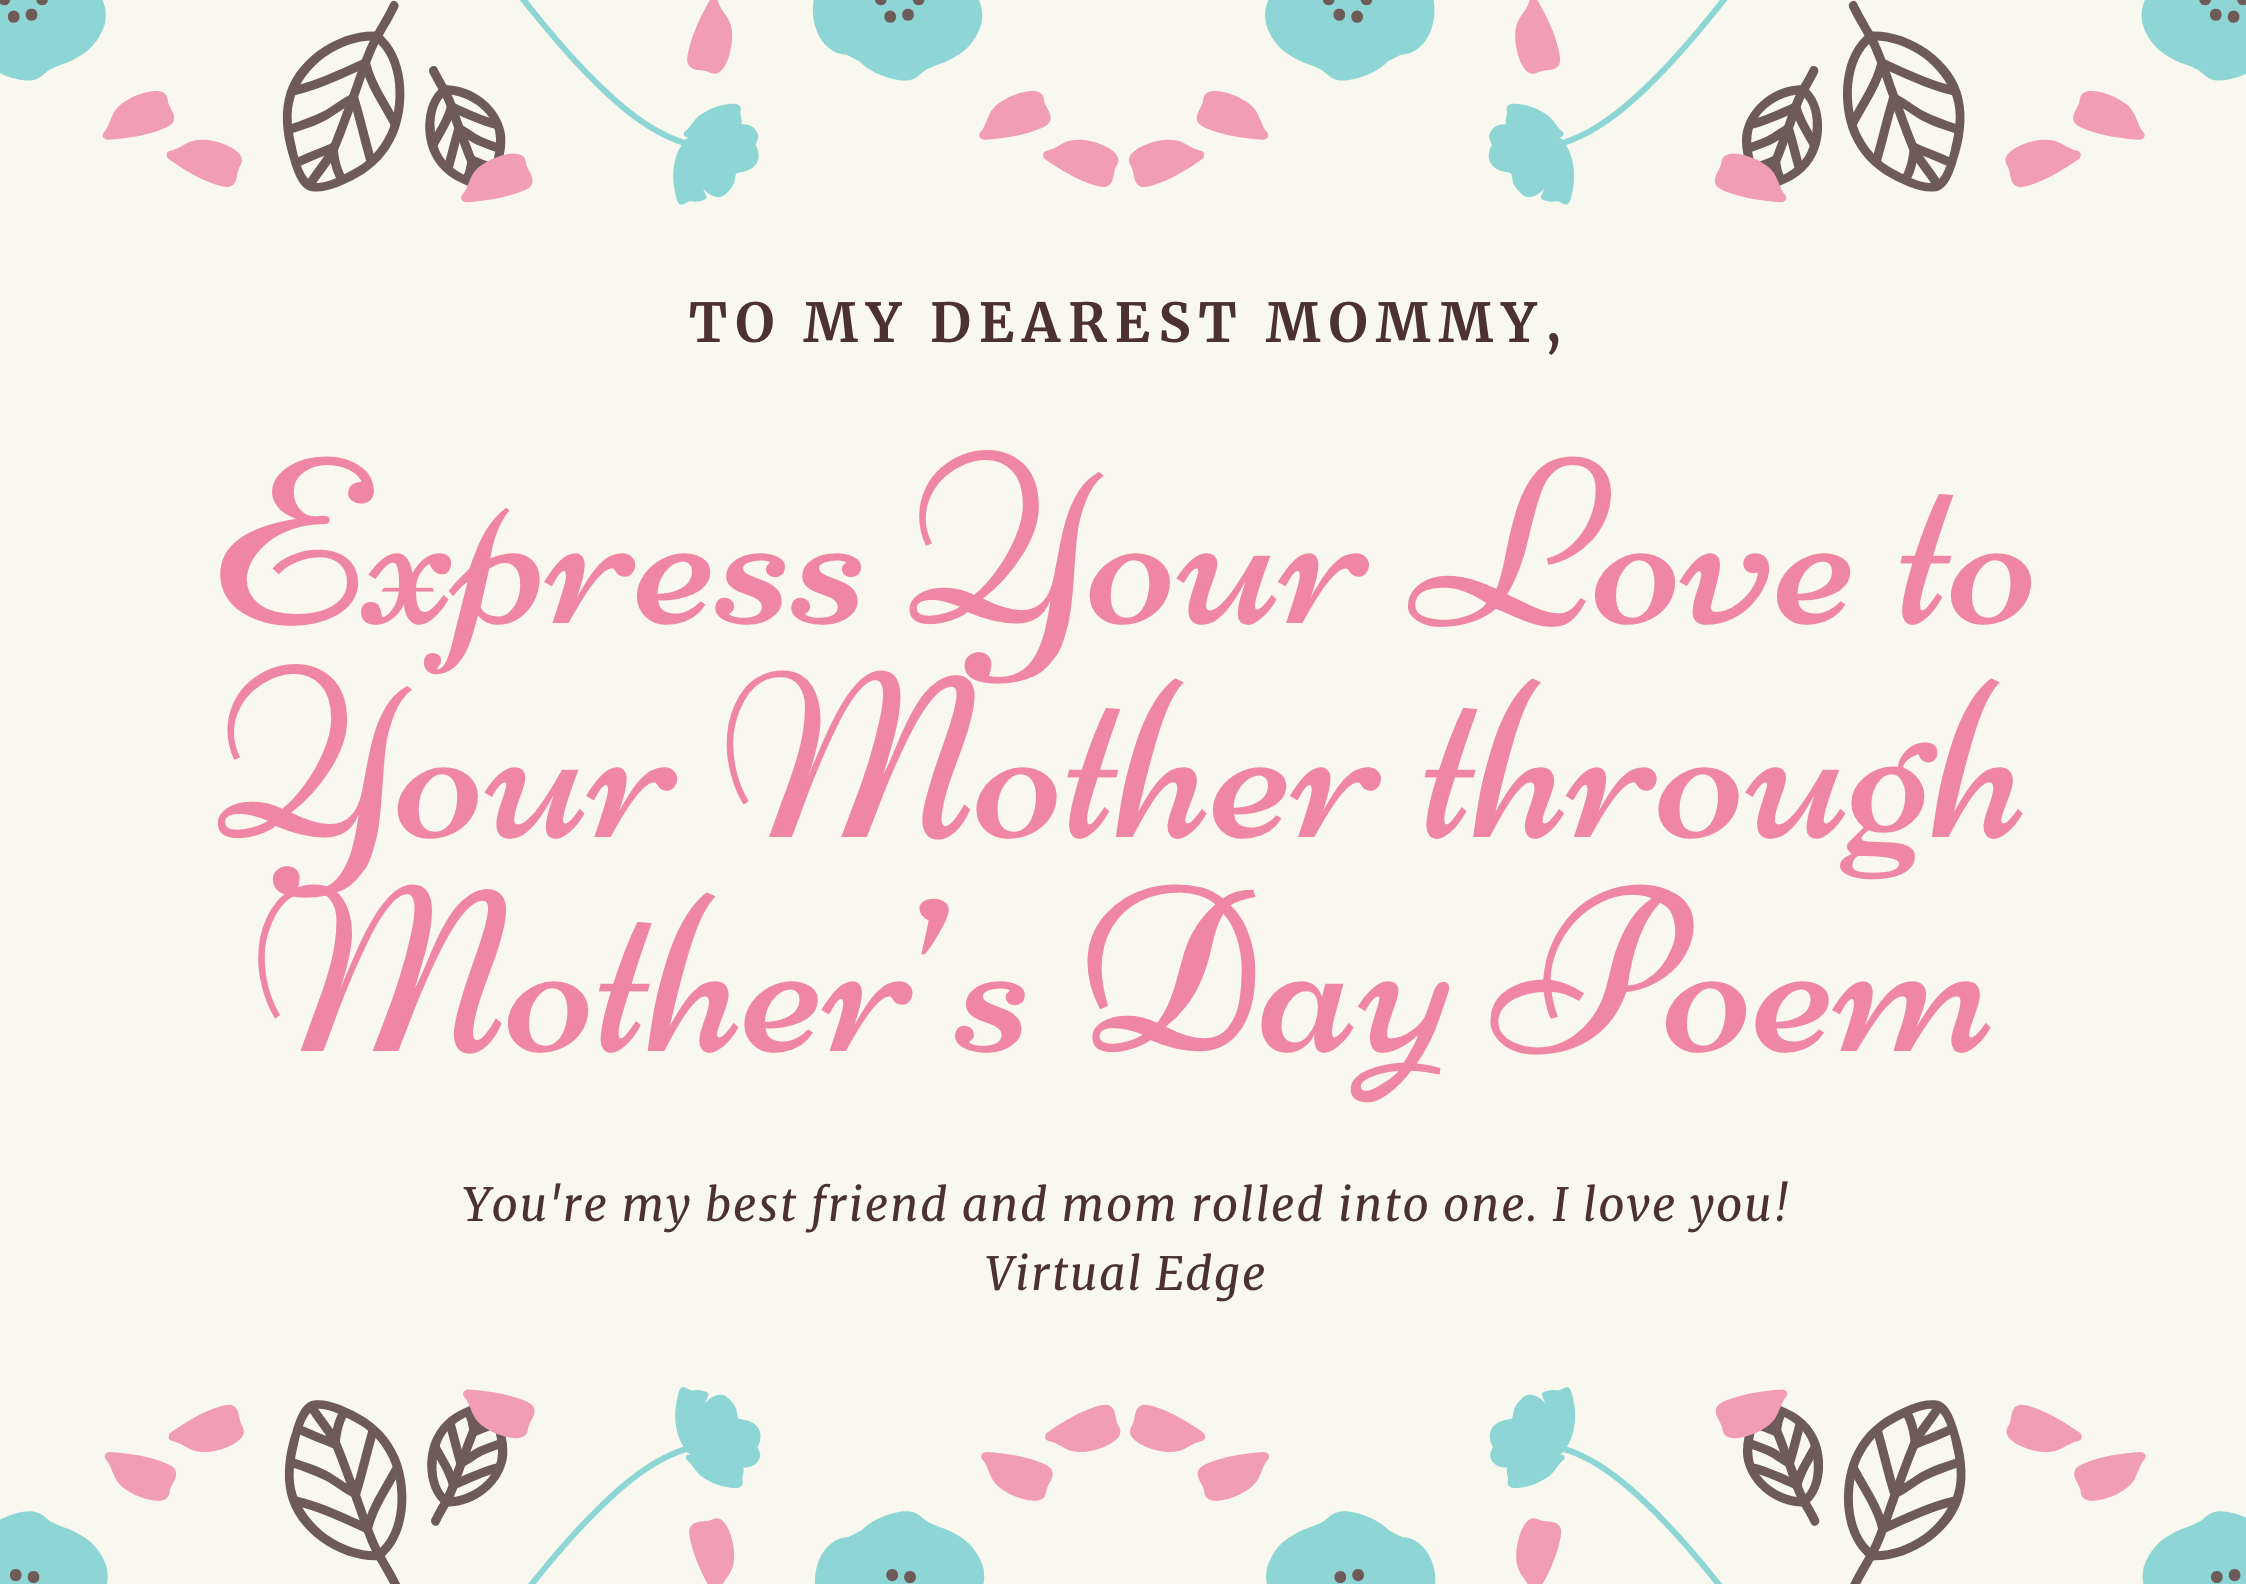 Express Your Love to Your Mother through Mother's Day Poems ...